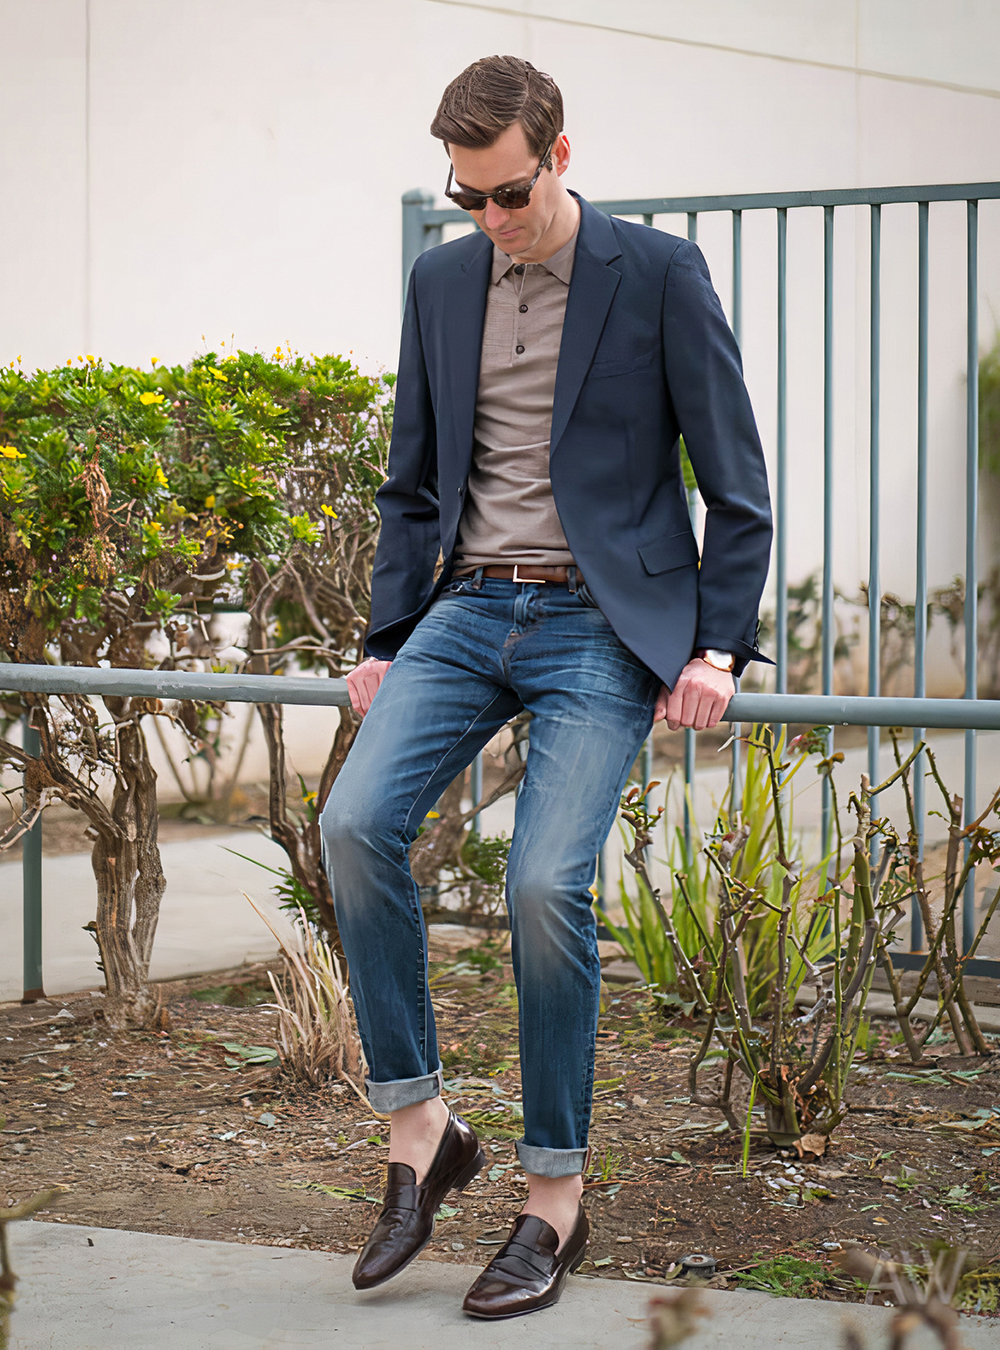 navy blazer, taupe polo shirt, blue jeans, and brown loafers